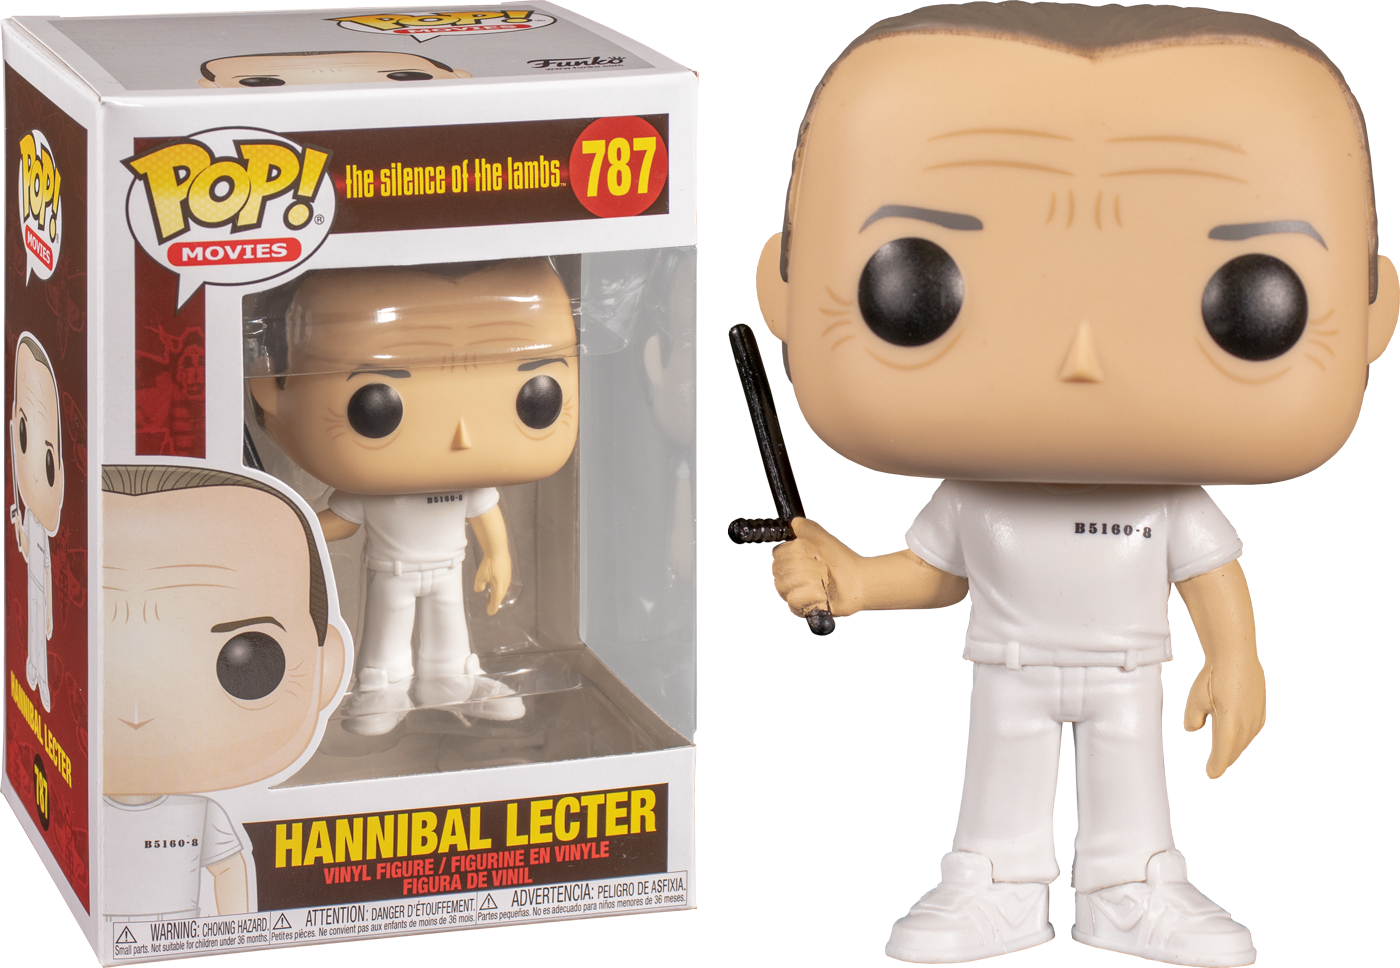 Funko Pop! The Silence of the Lambs - Hannibal Lecter #787